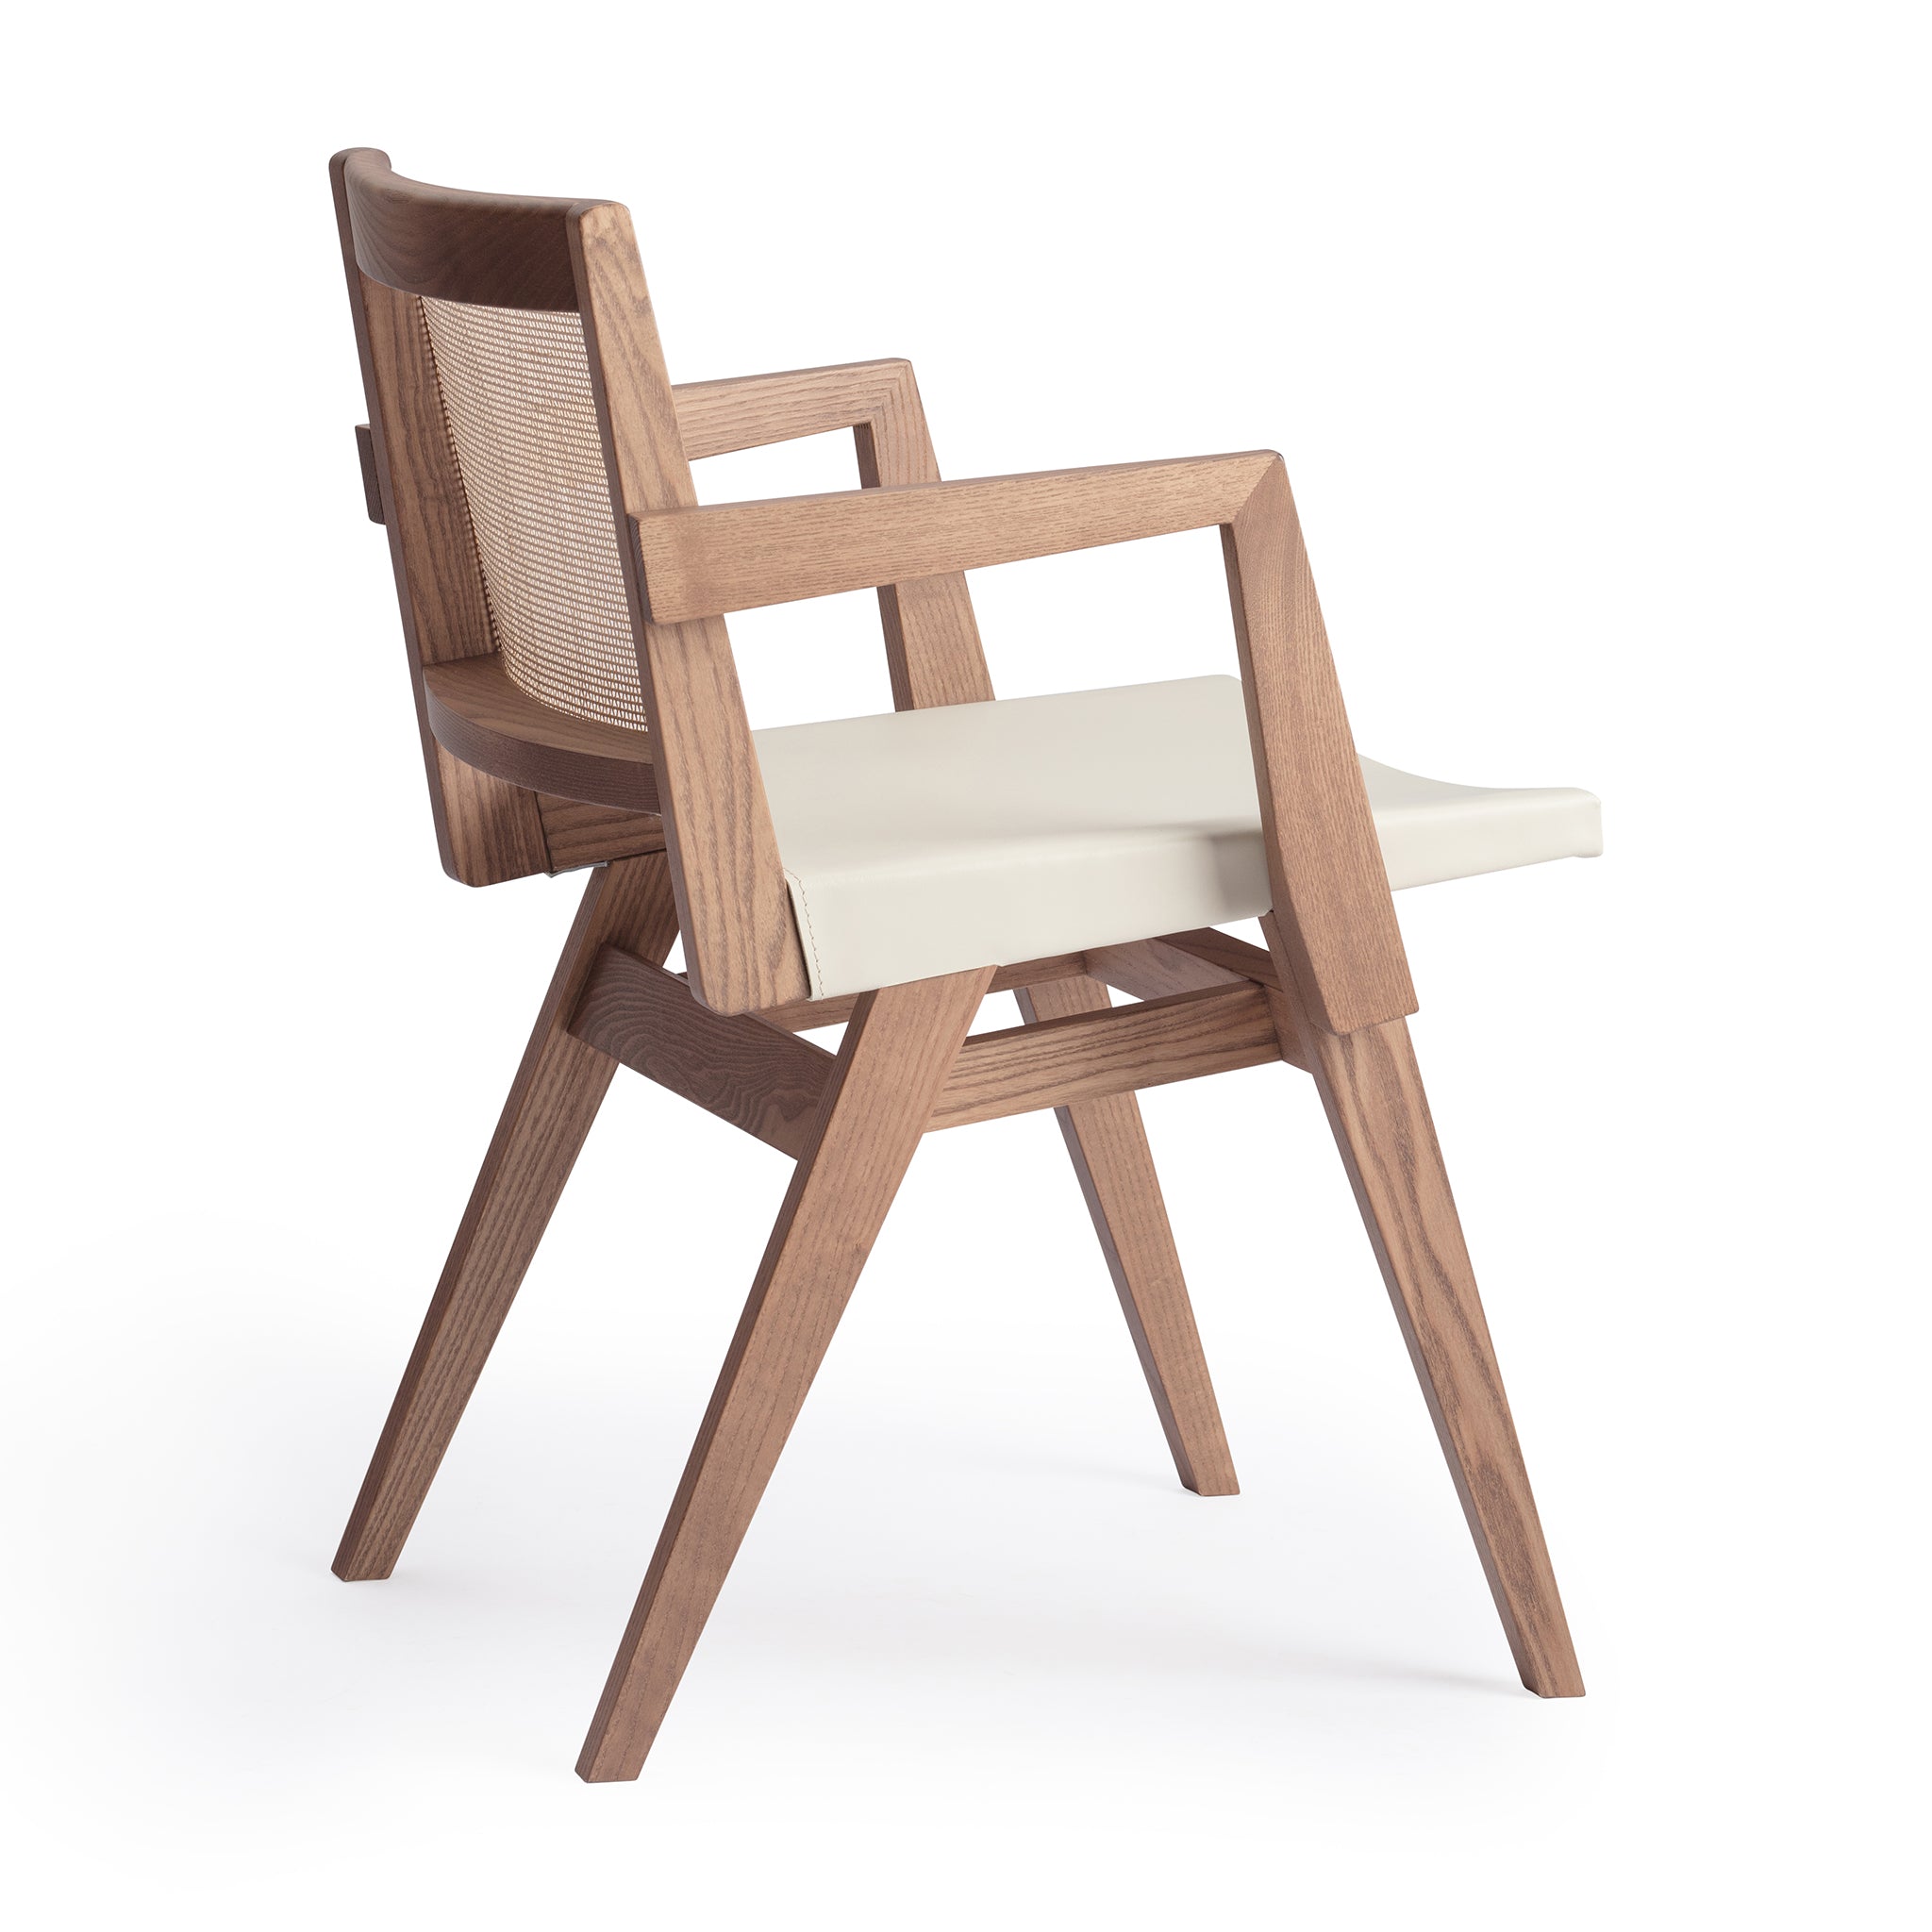 Back view of an "Elye" designer dining chair, walnut stained ash frame, square weave cane back, contract grade off white leather seat, produced by Klarel in Italy. #K40-1